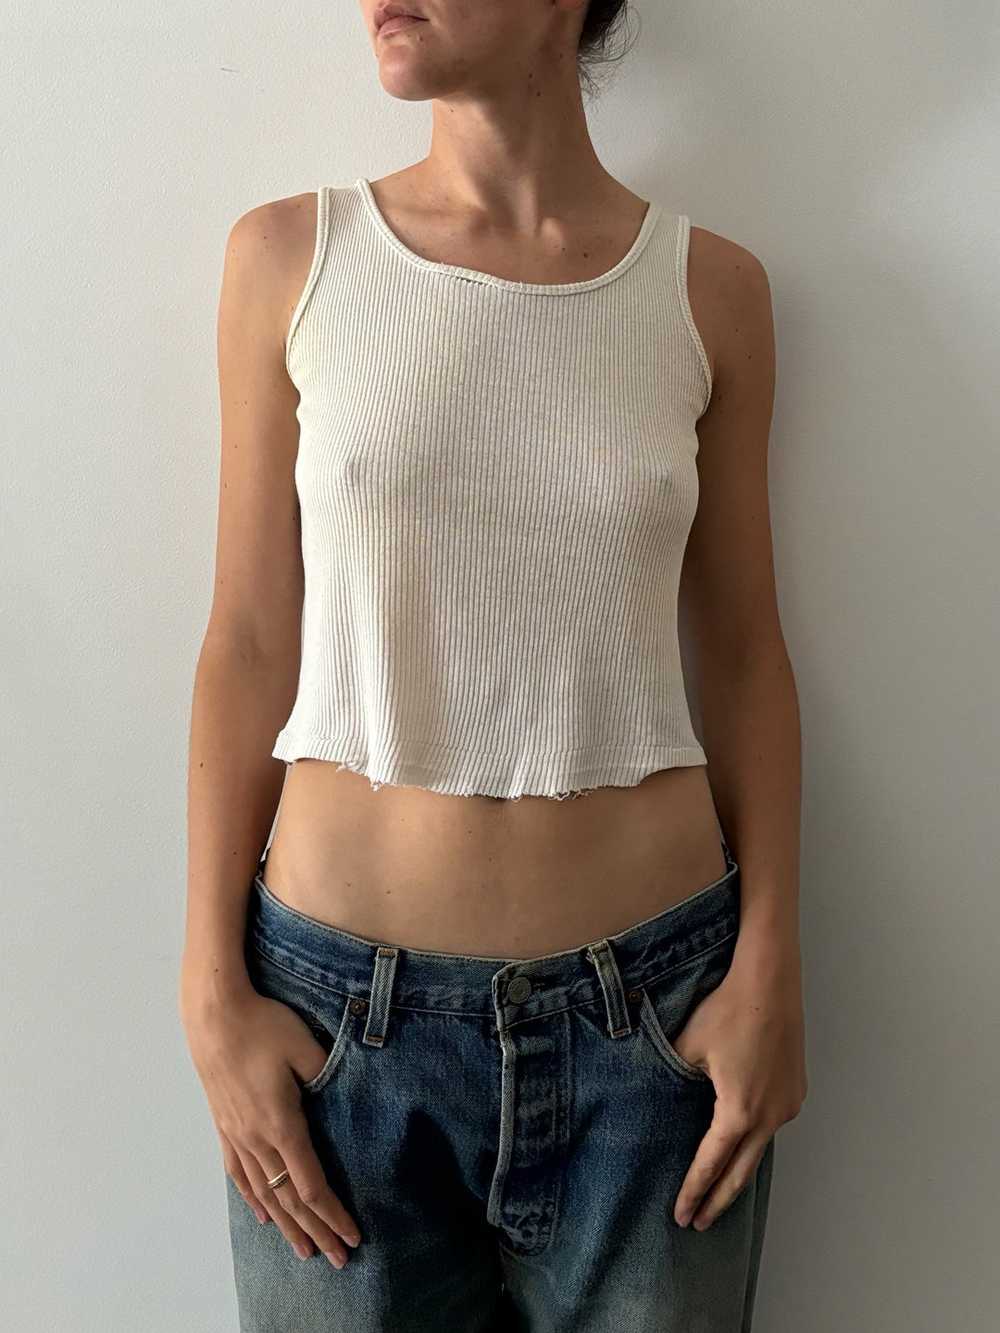 60s Cropped White Tank Top - image 2